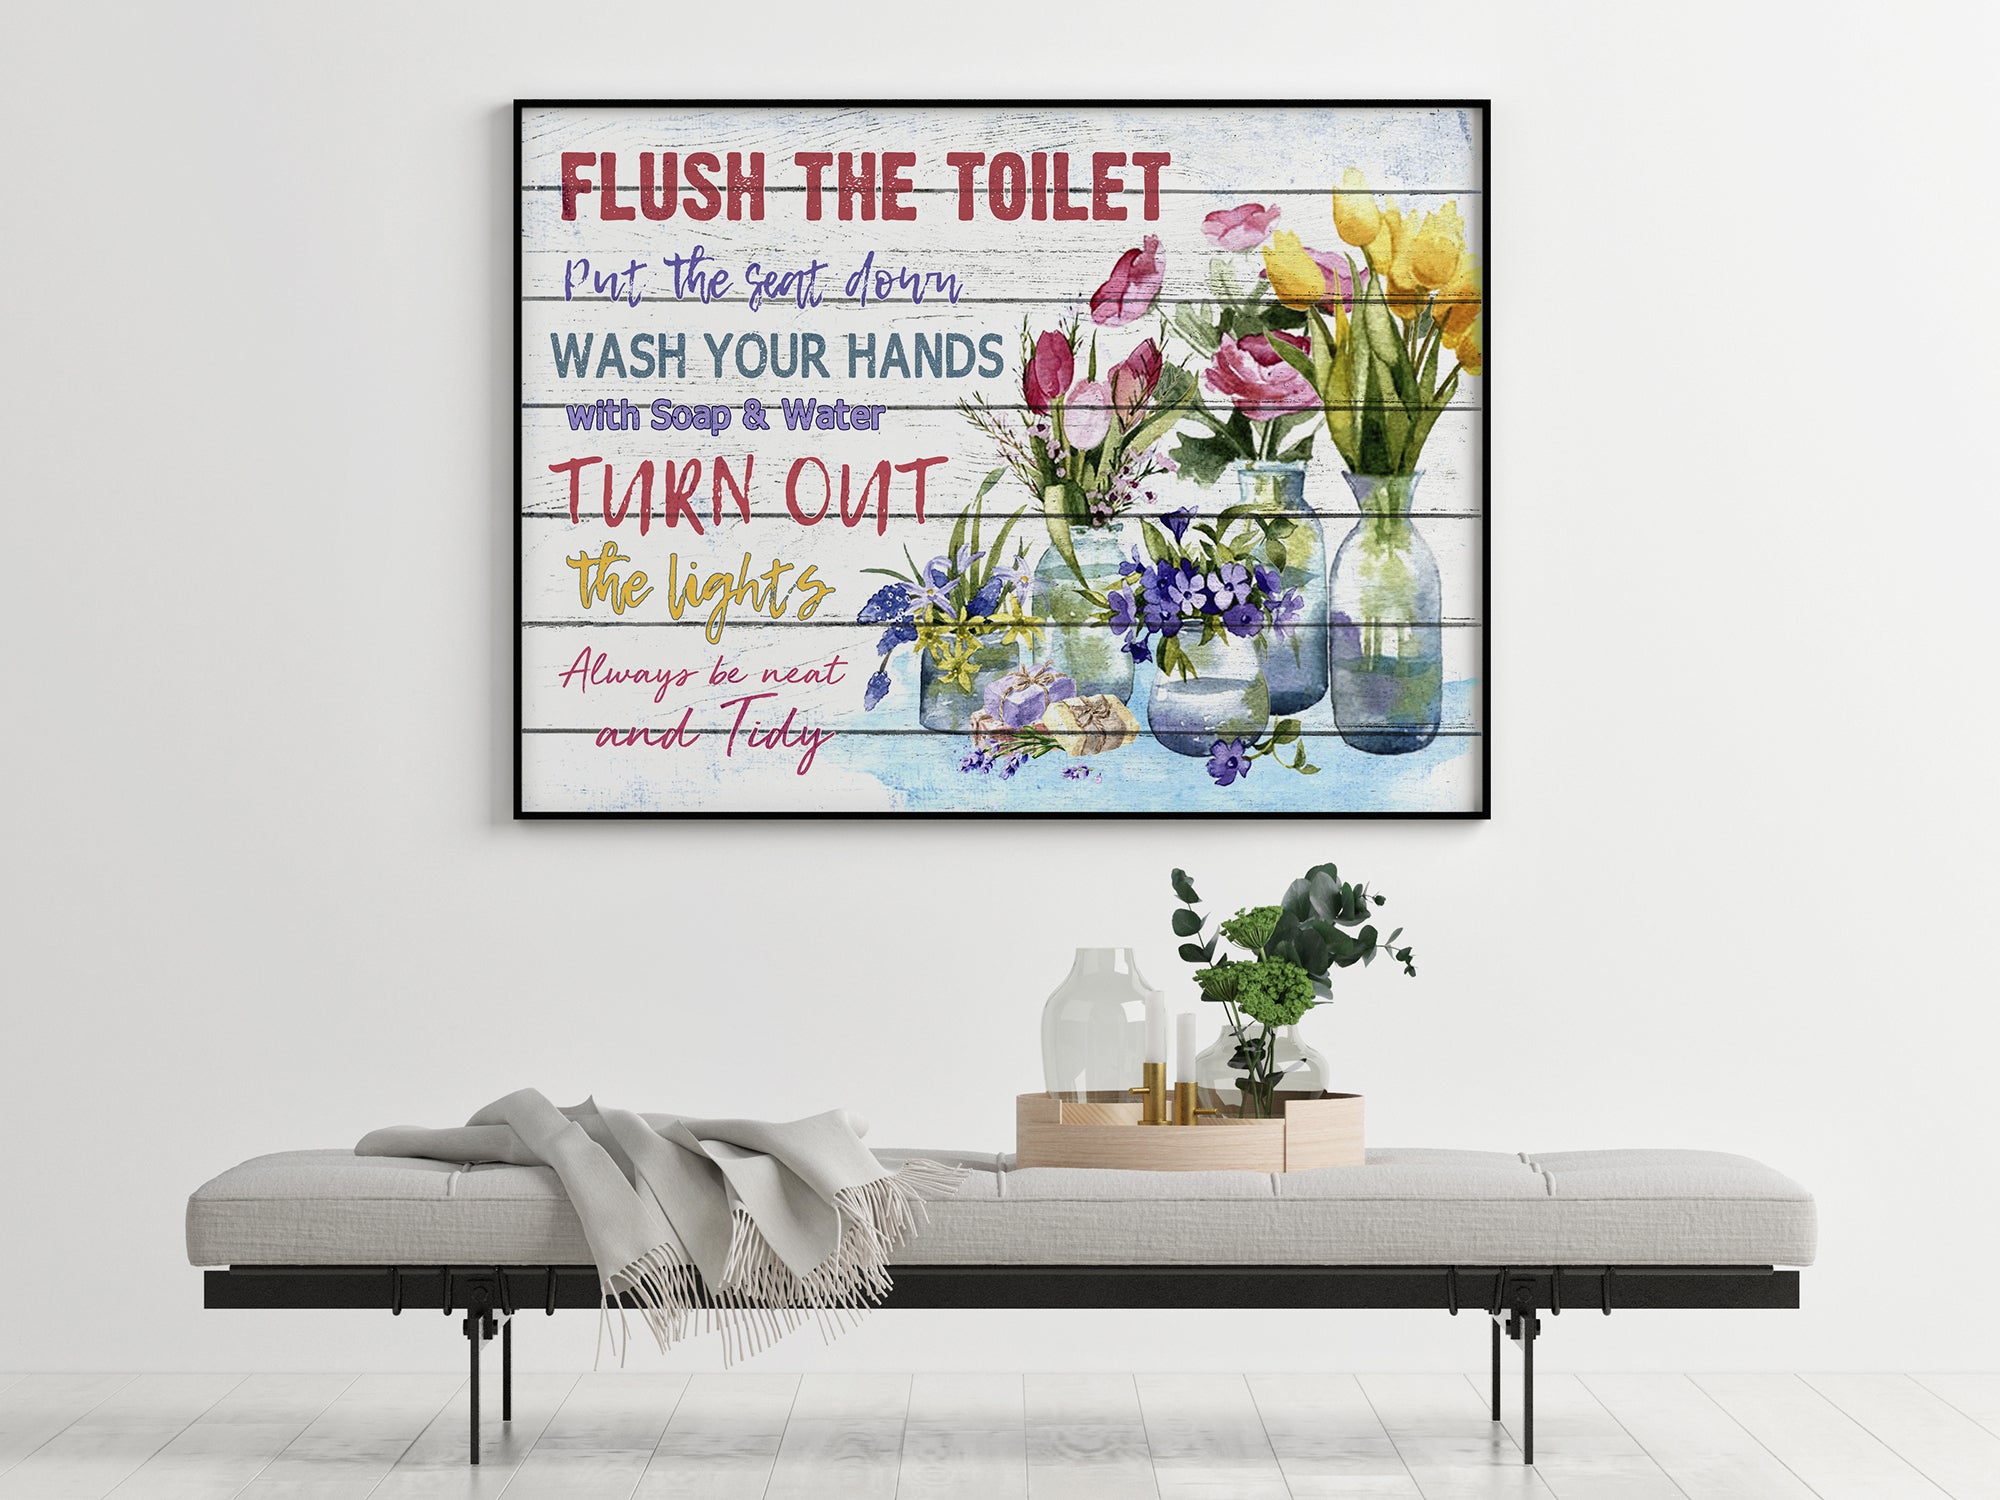 Beautiful Bathroom Poster Flush The Toilet Always Be Neat And Tidy